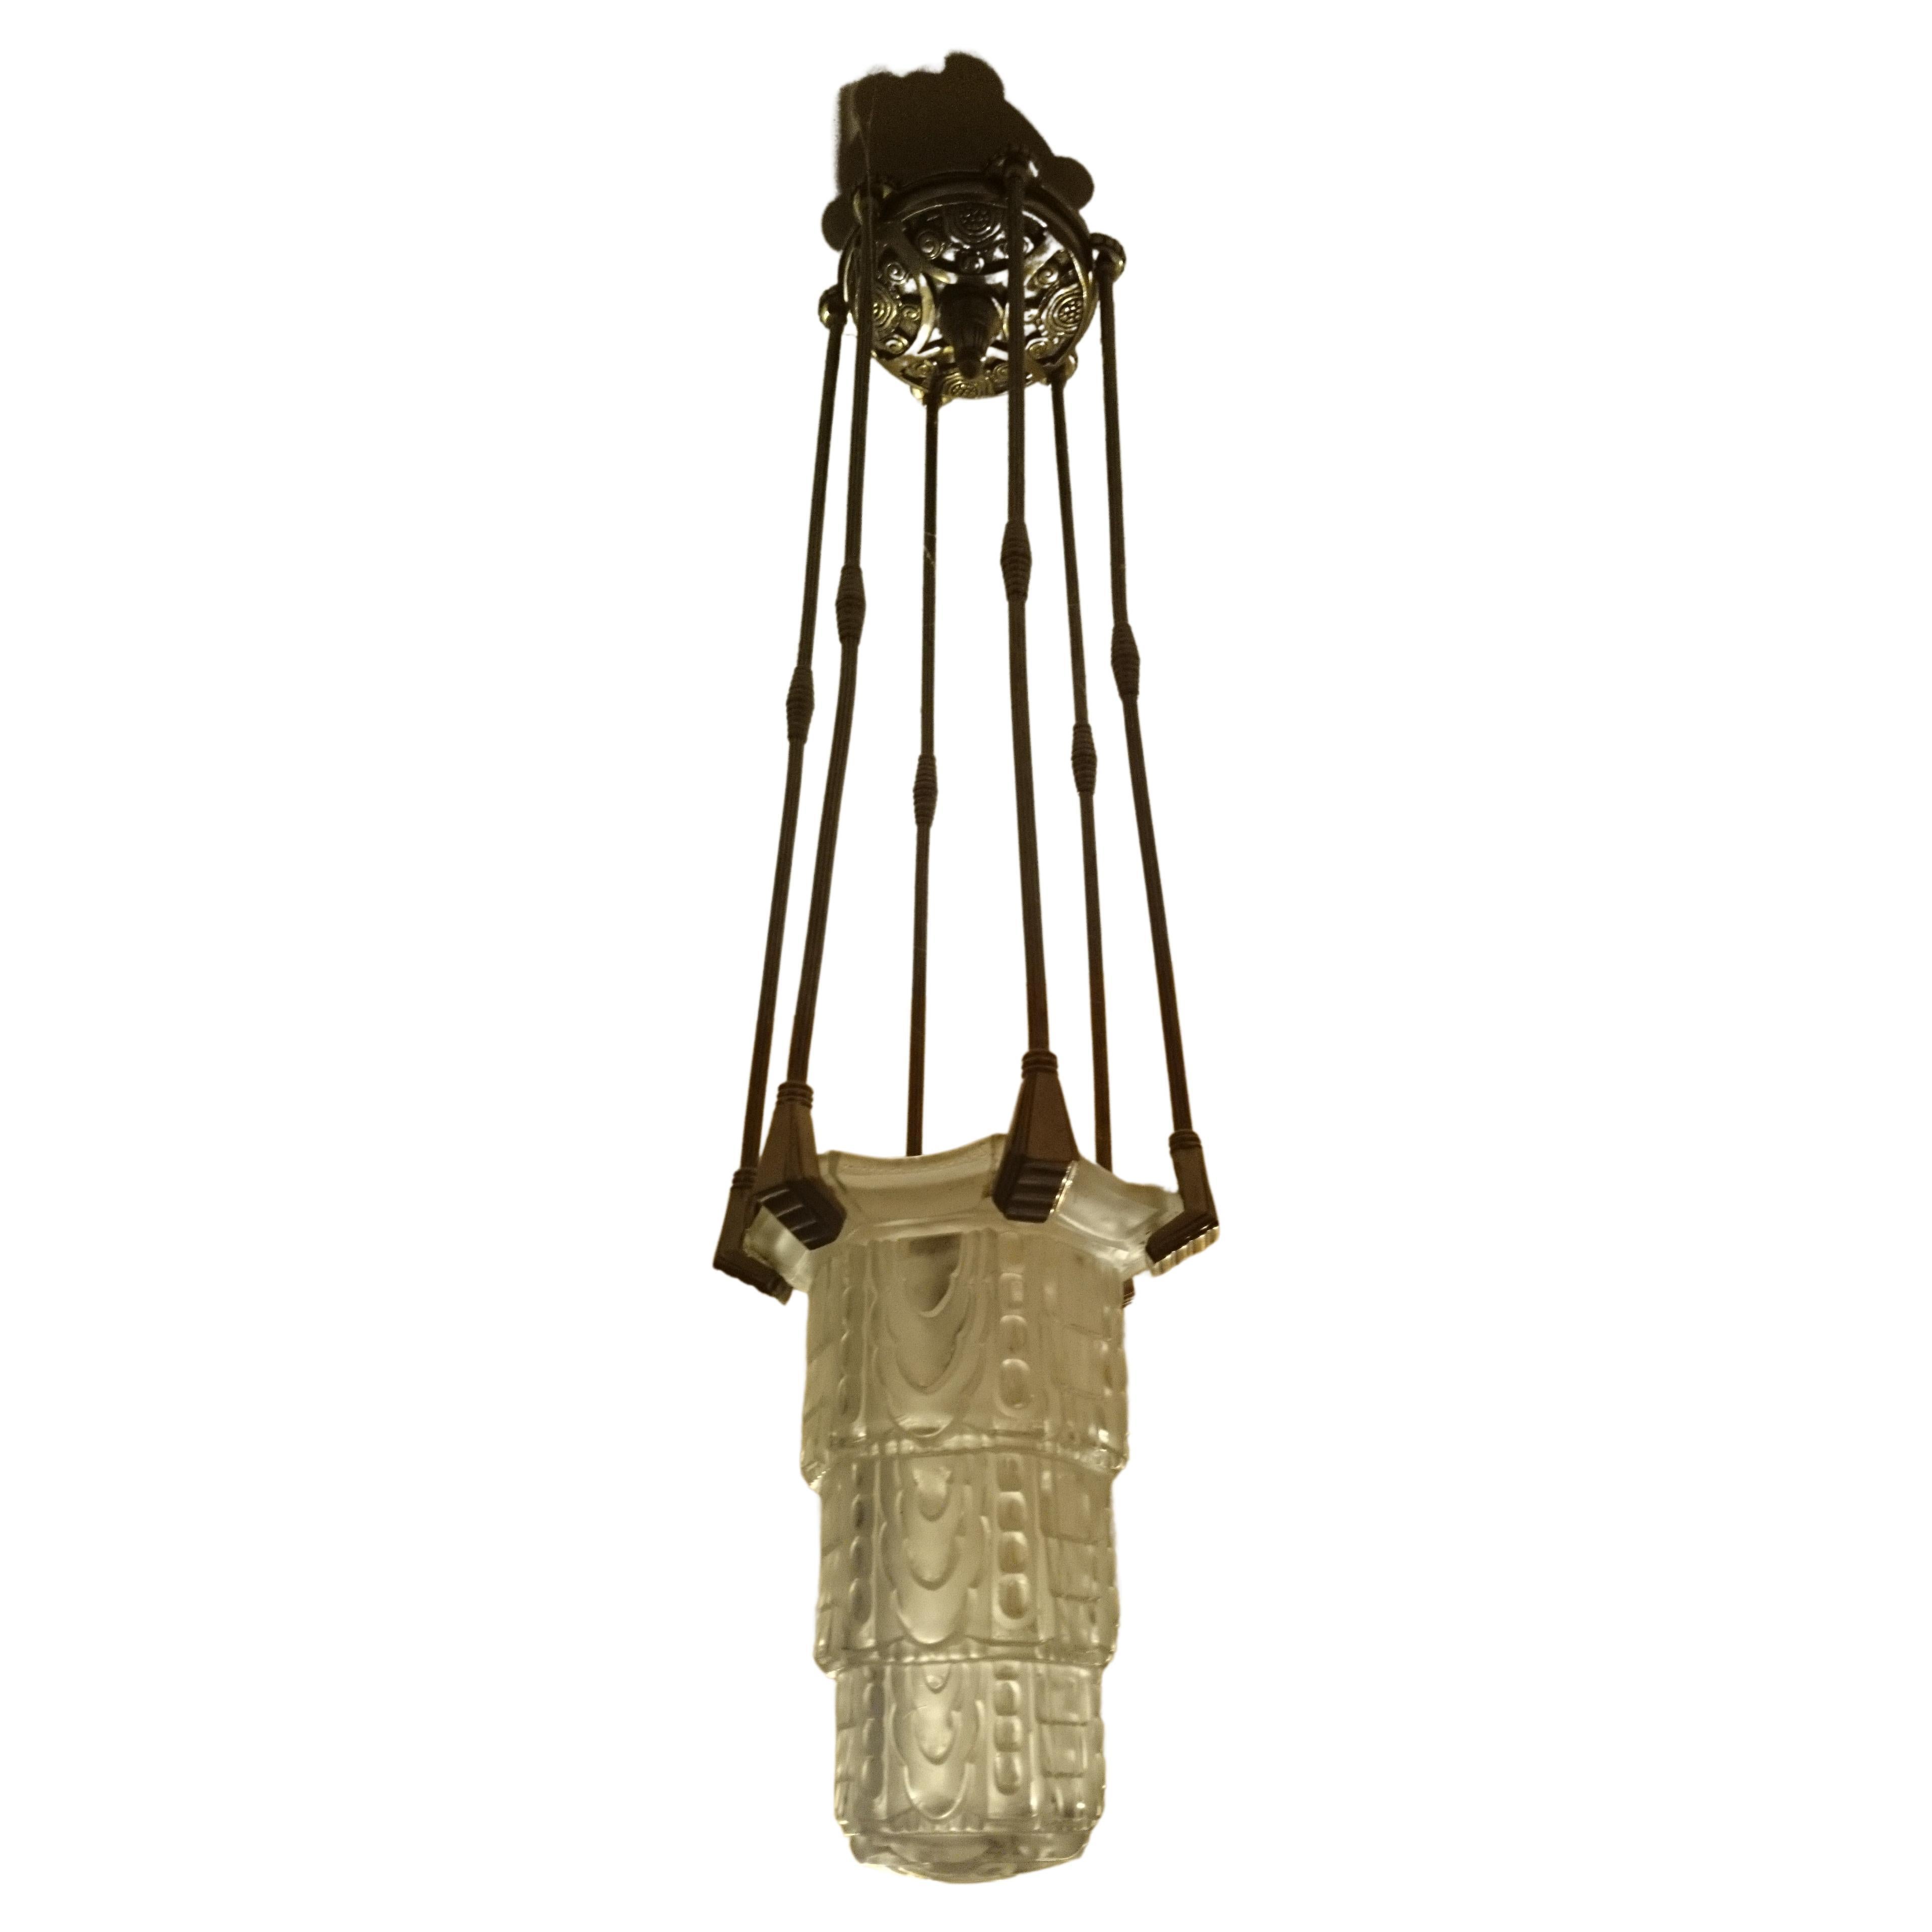 Art Deco Ceiling Lamp / Lantern by Marius Ernest Sabino, Signed and Numbered For Sale